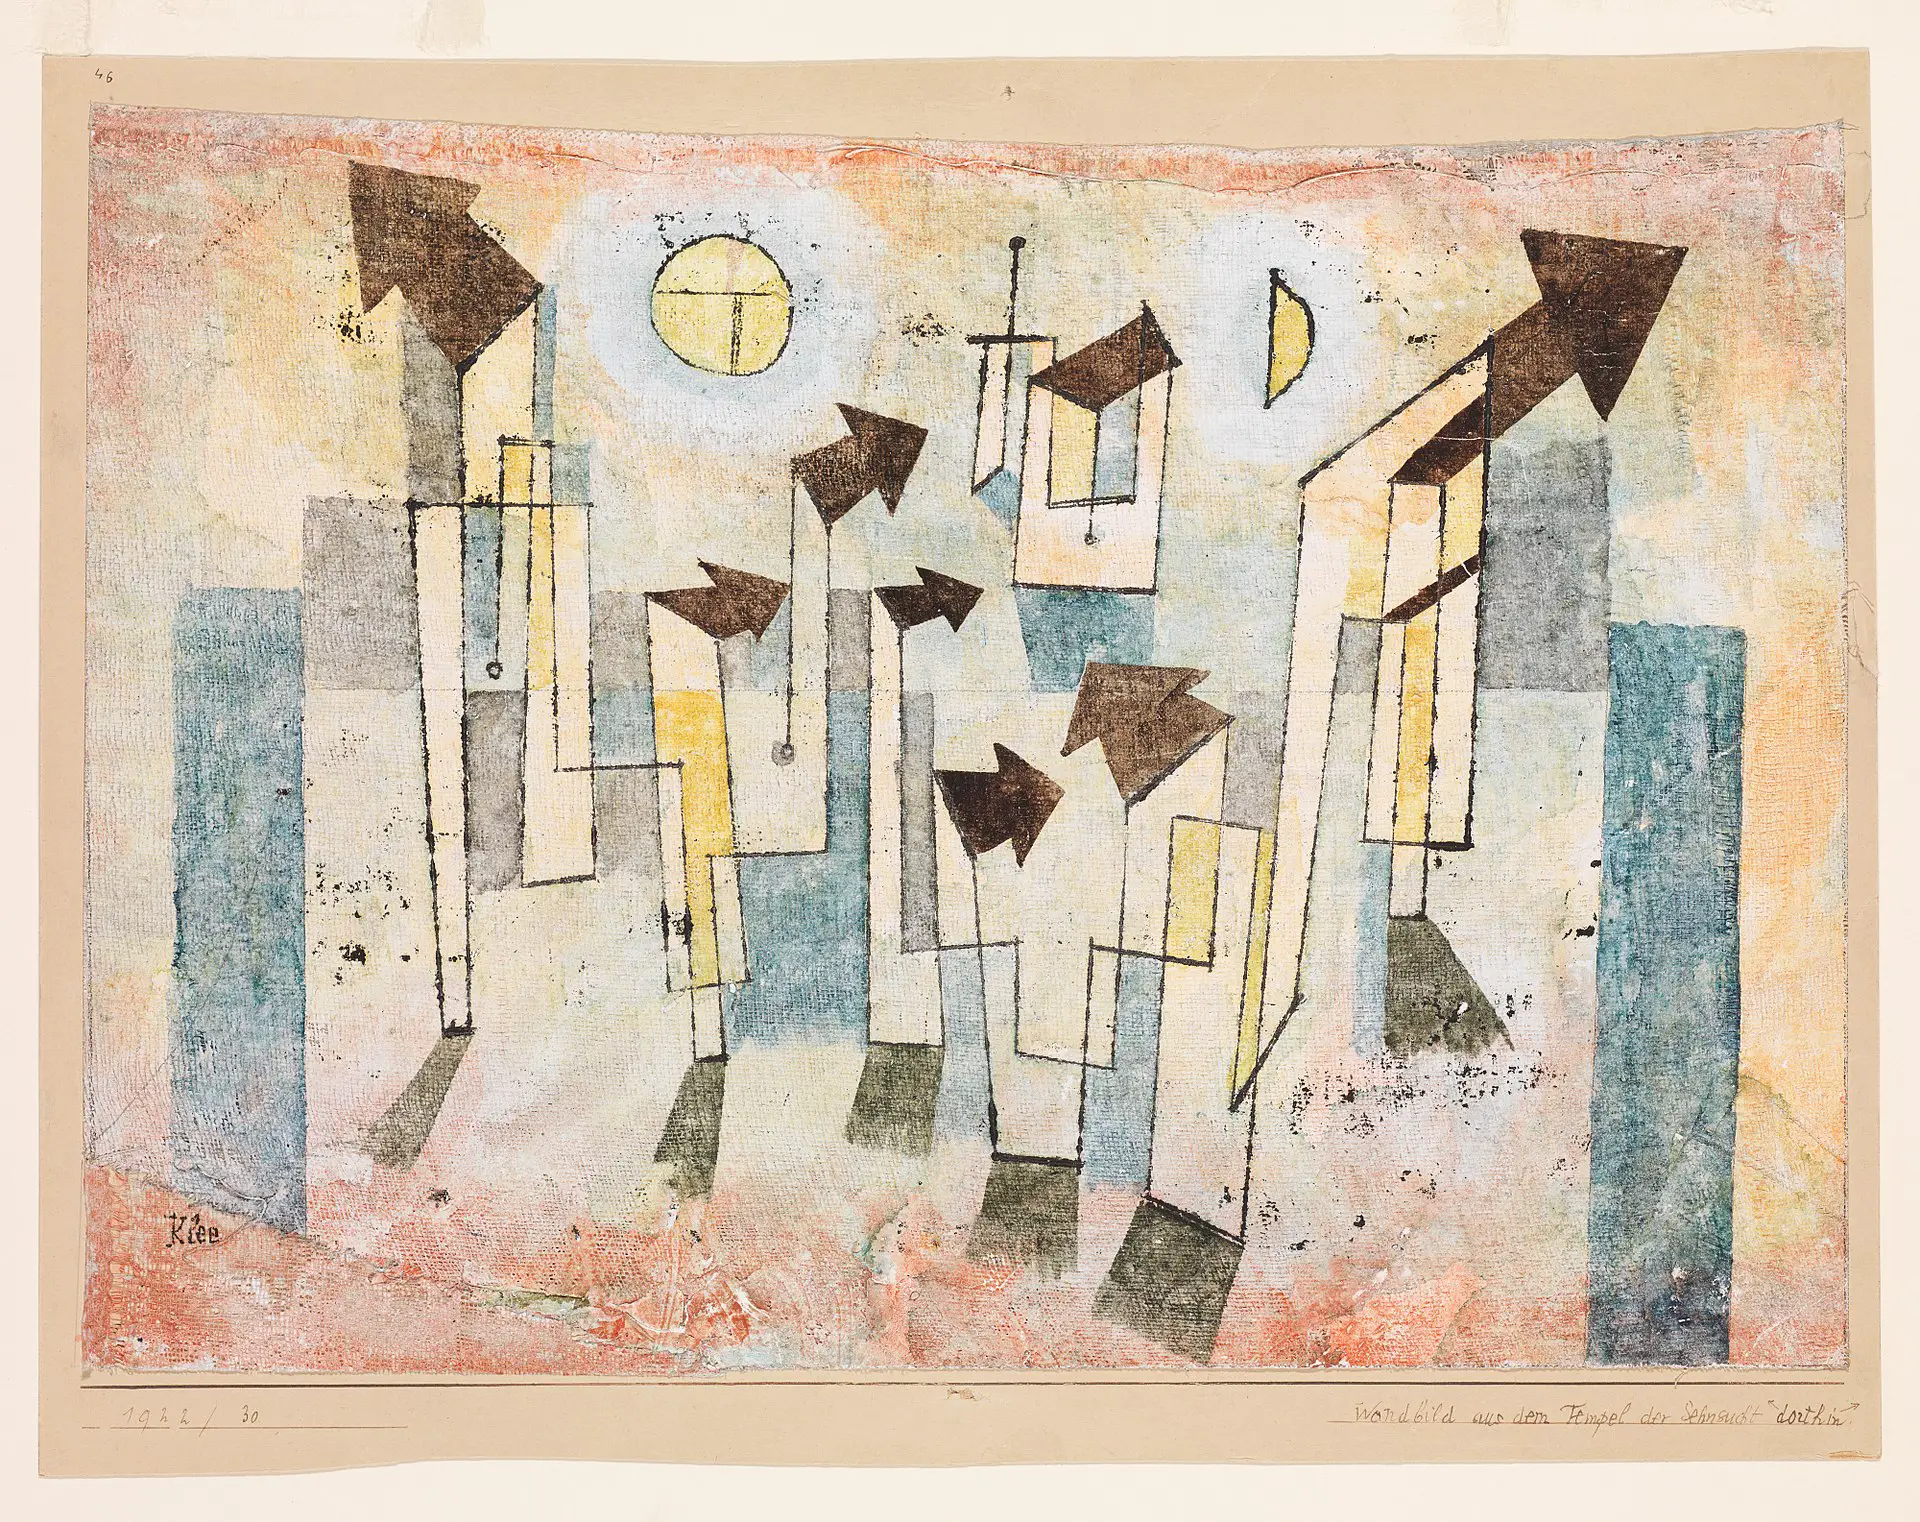 Mural from the Temple of Longing Thither Paul Klee